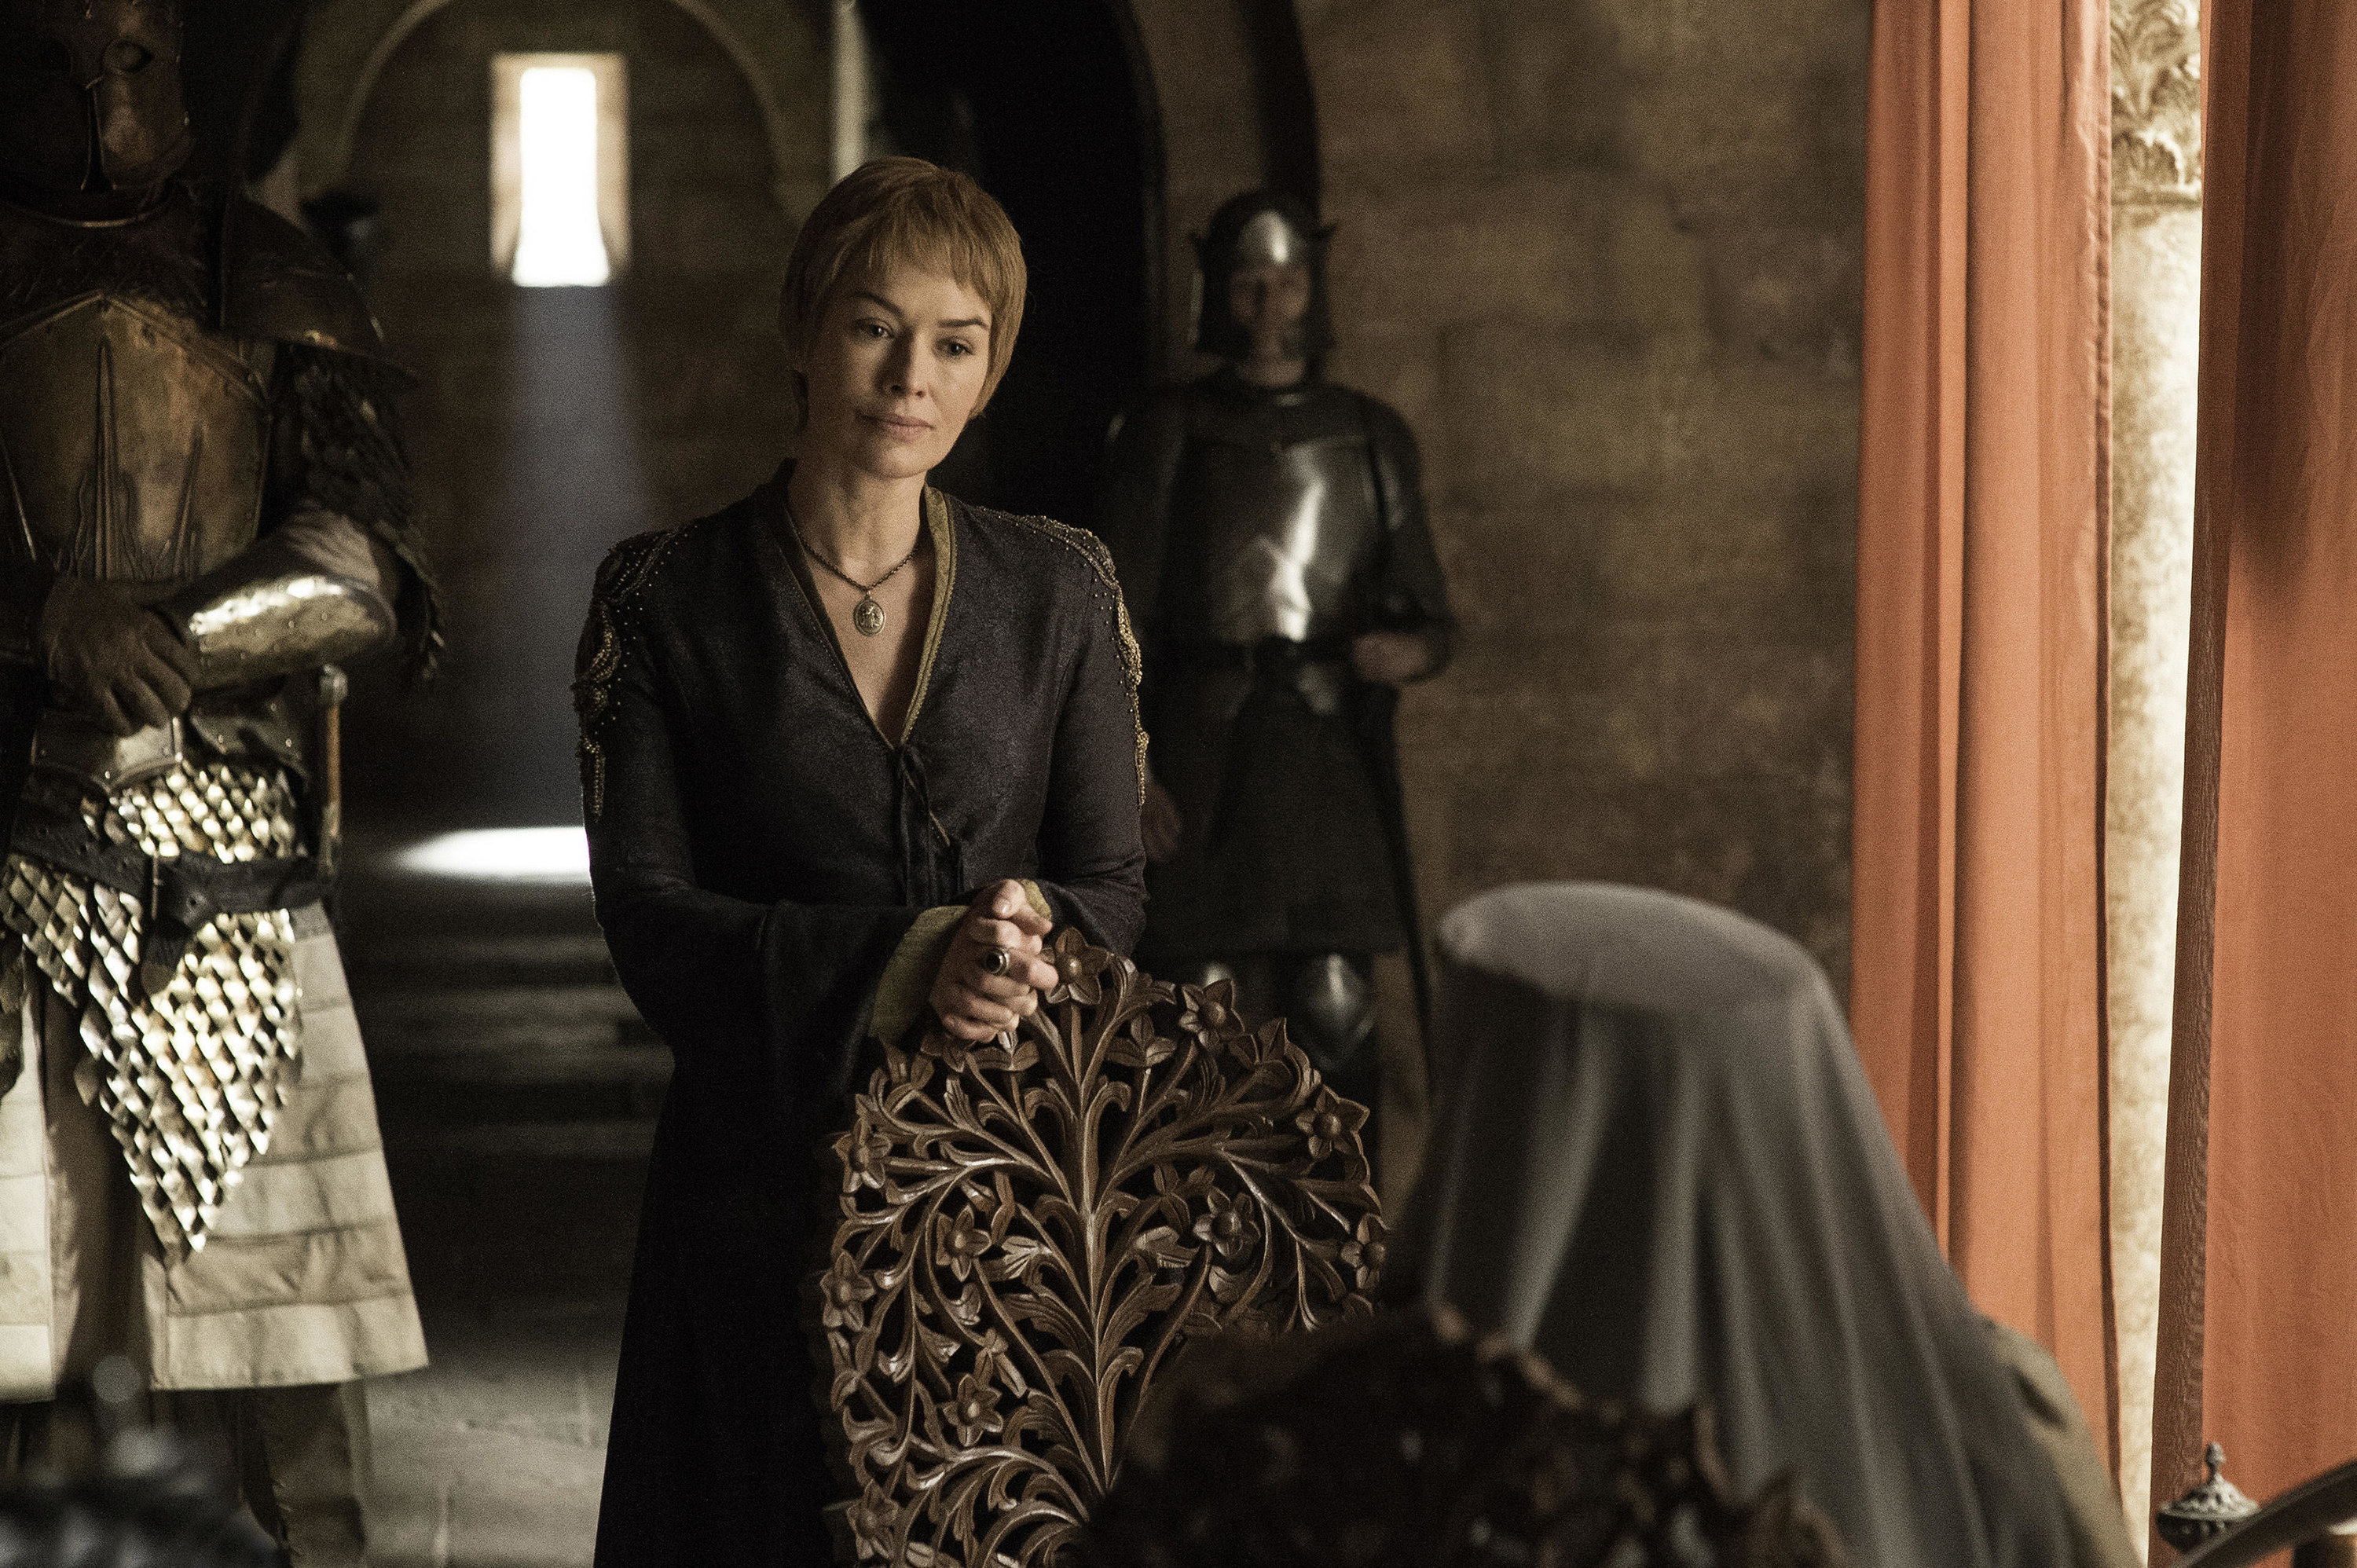 Lena Headey as Cersei Lannister in &quot;Game of Thrones&quot;